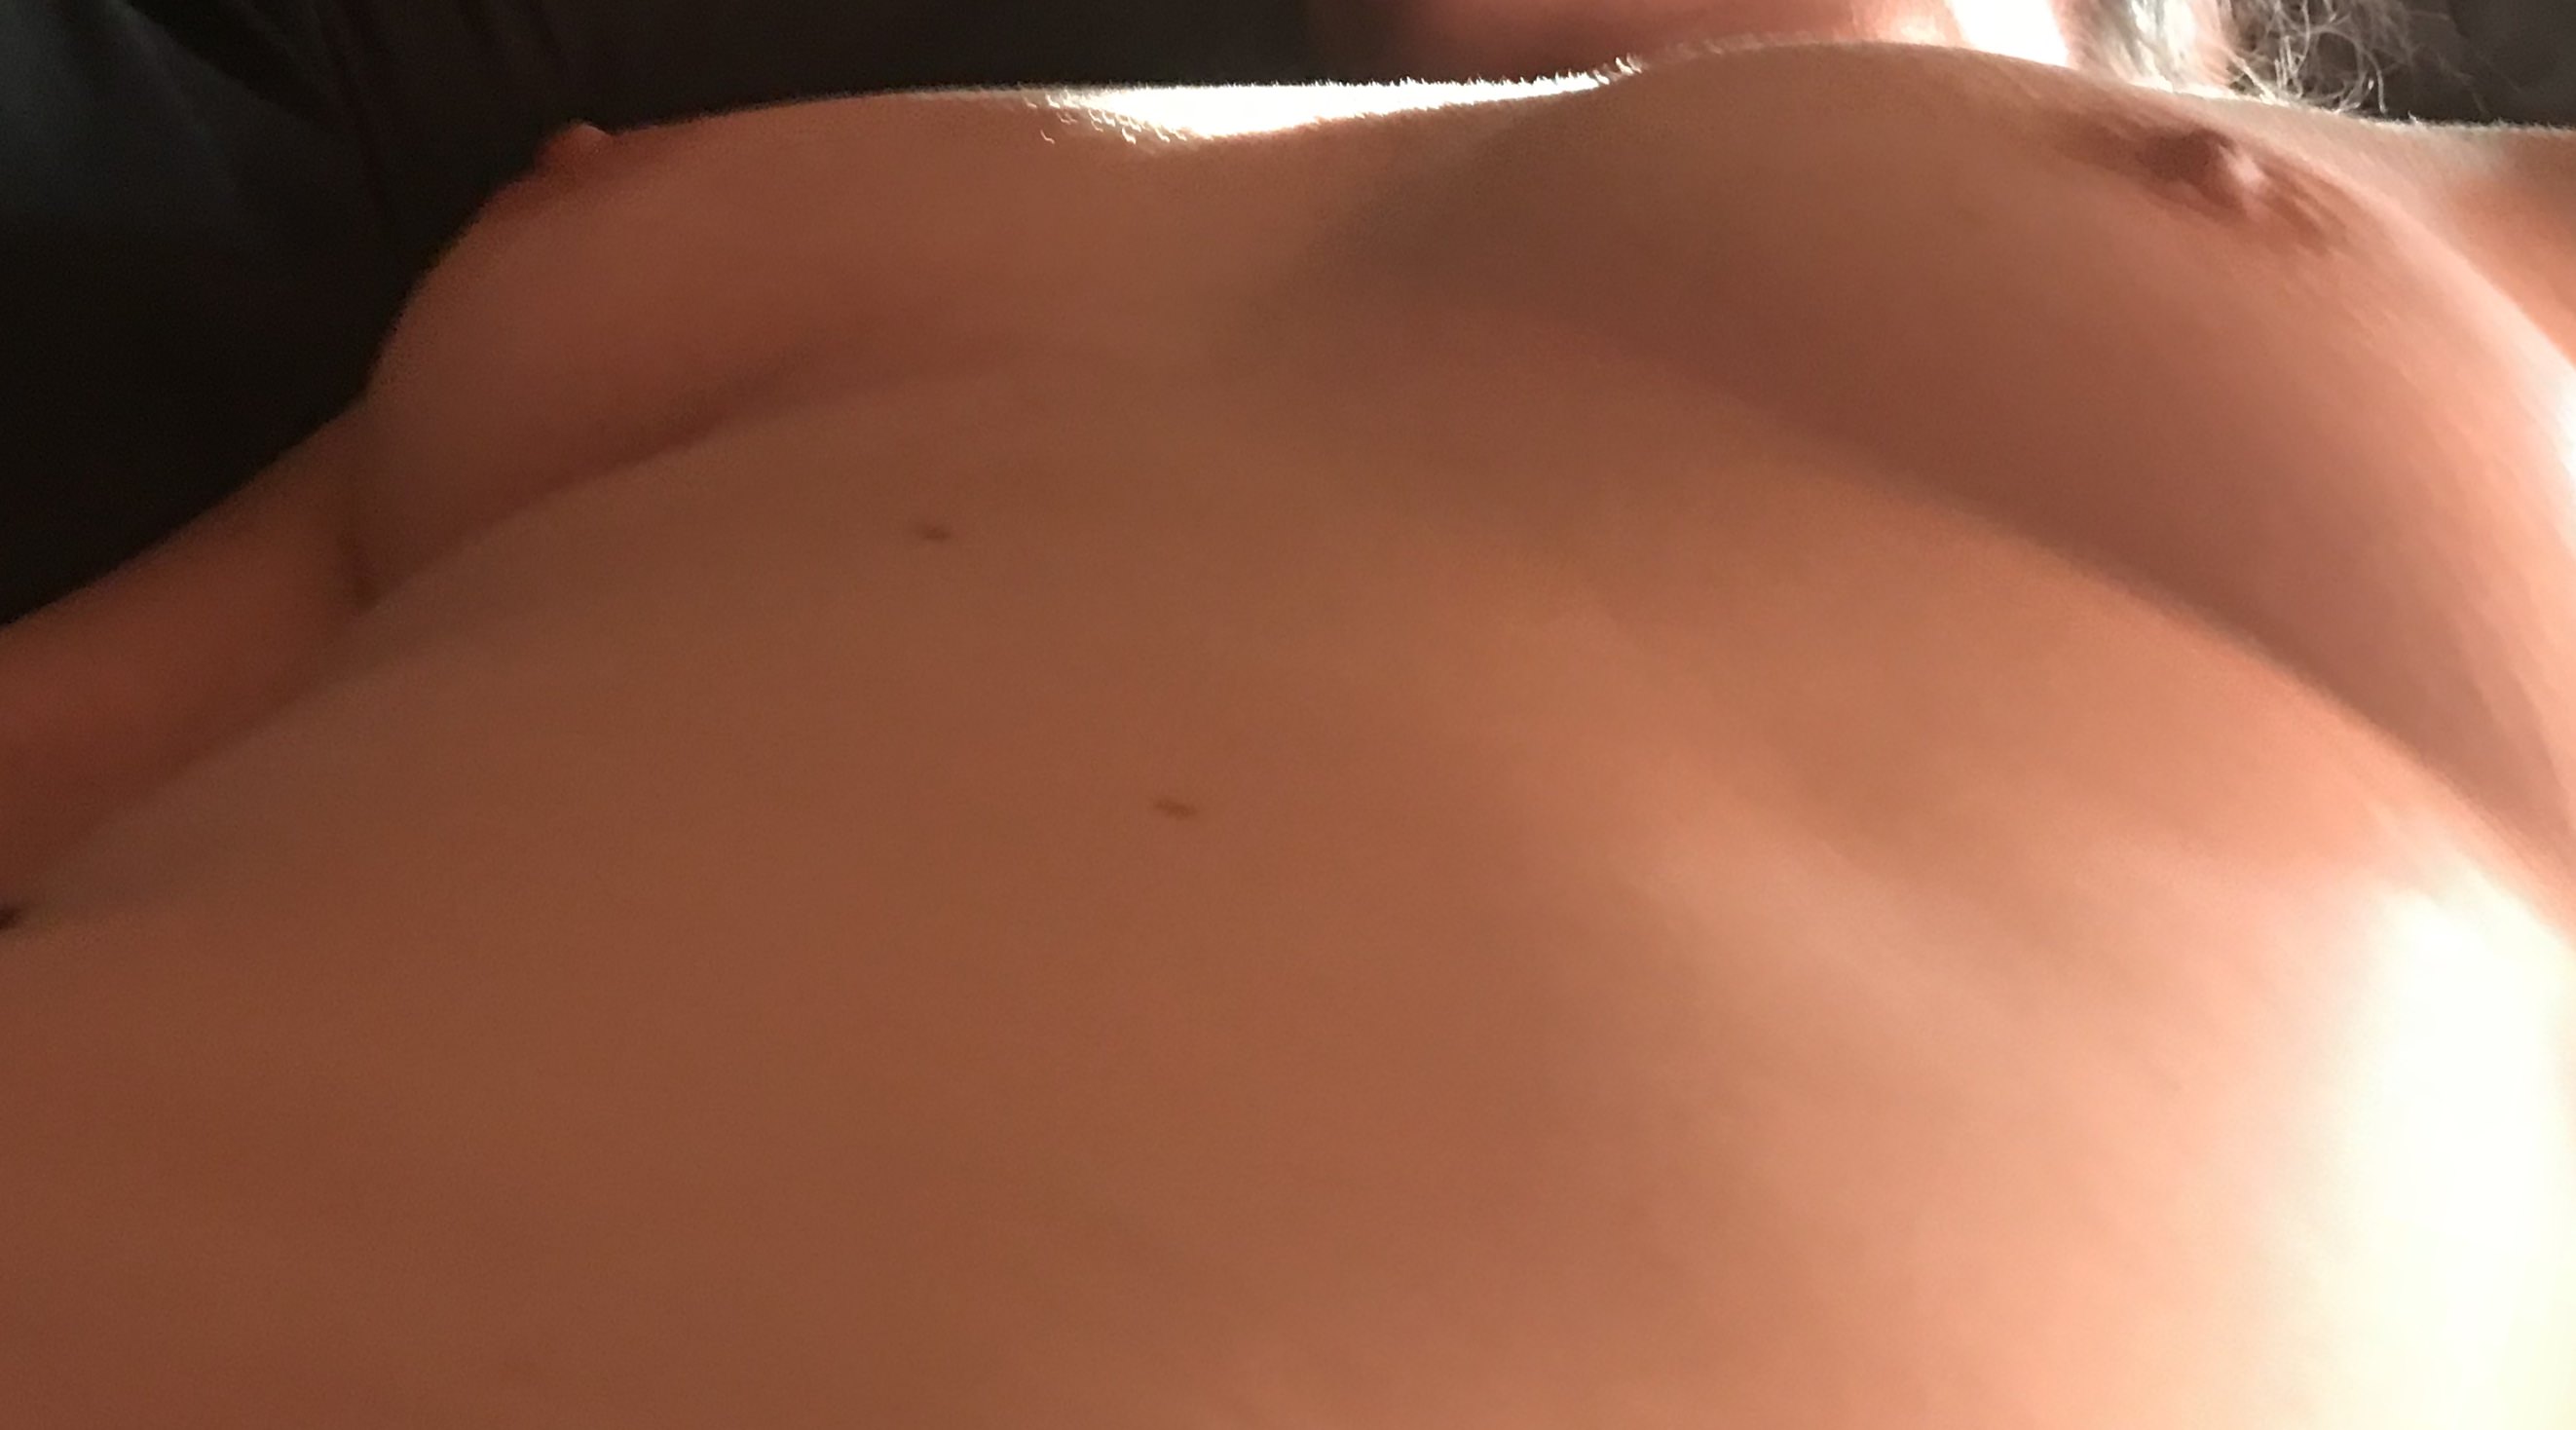 Milf Tits While Laying On My Back Waiting Porn Pic Eporner